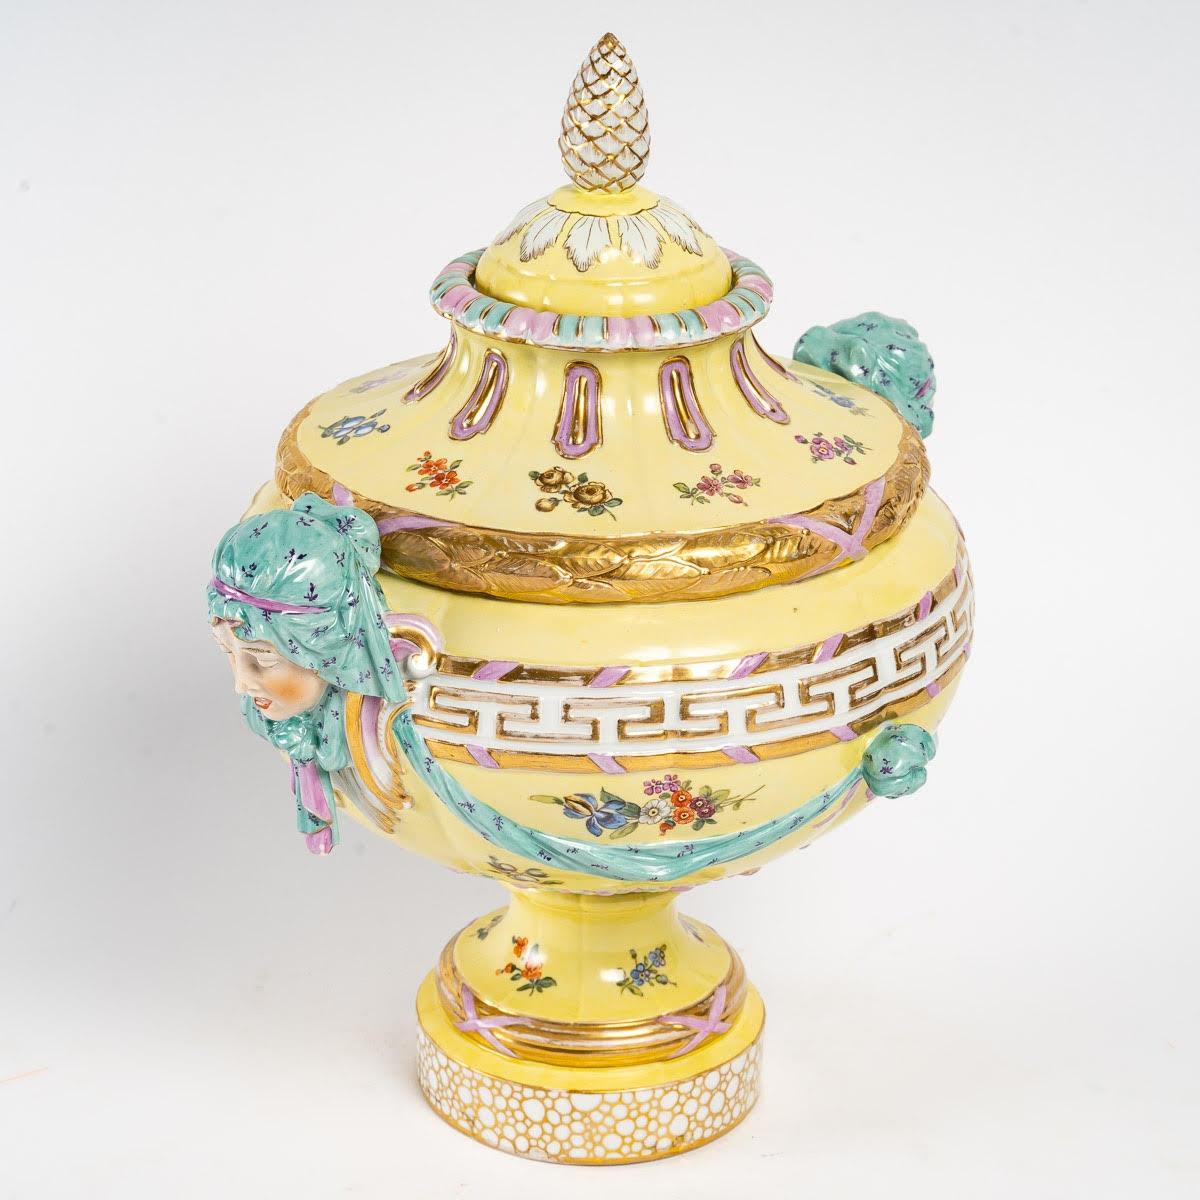 Napoleon III Covered Pot in Berlin Porcelain, KPM Manufactory, 19th Century. For Sale